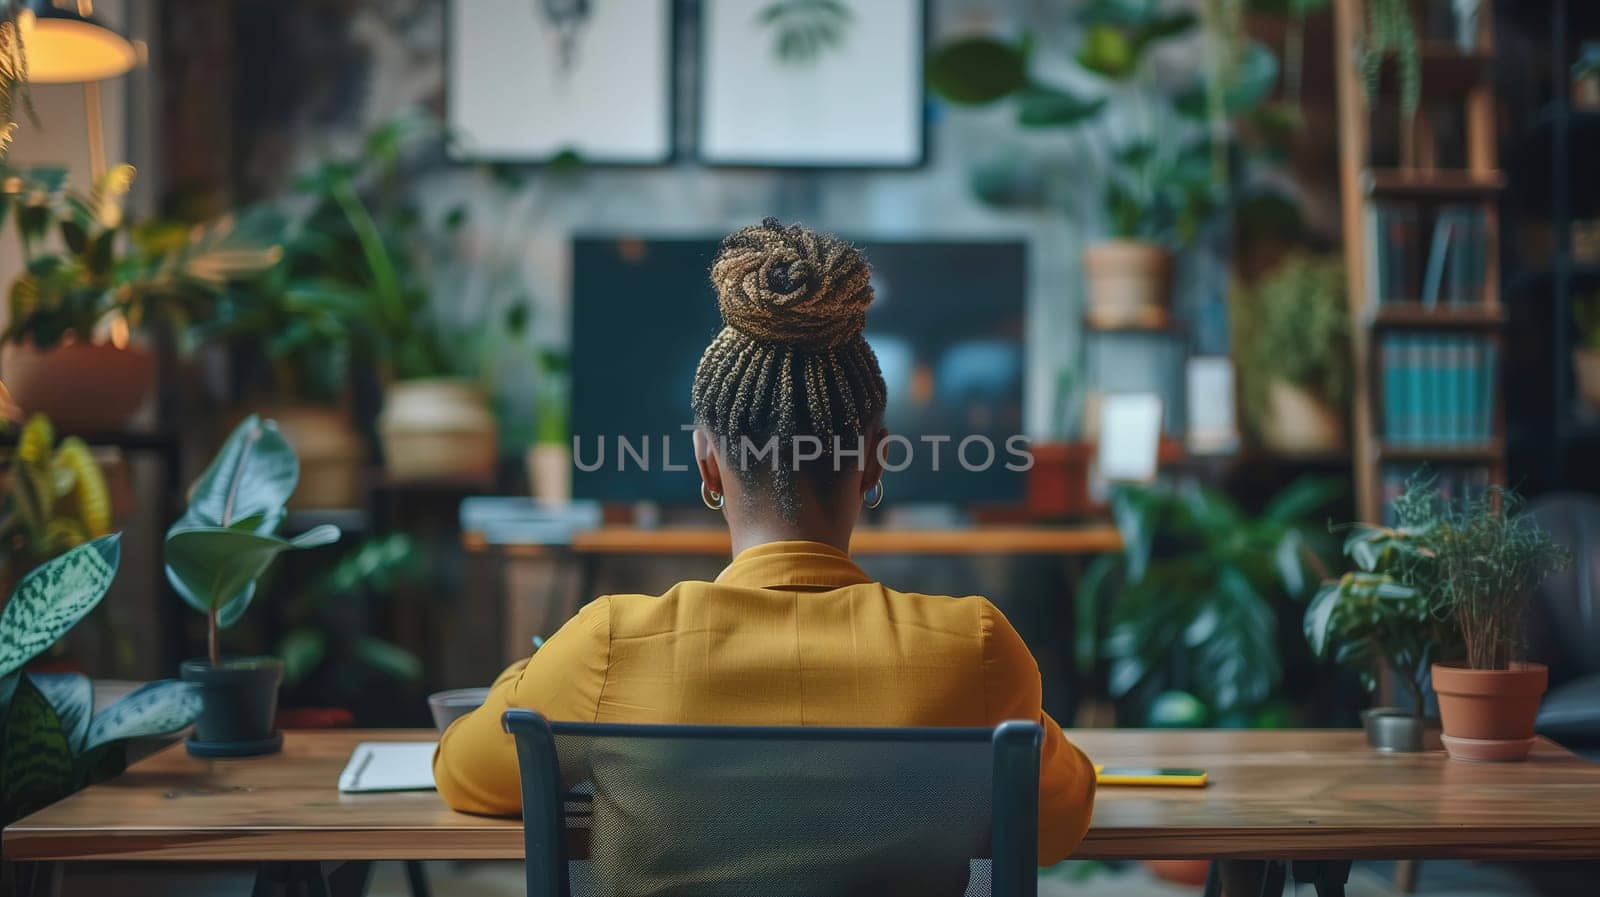 A business professional is seated at a wooden desk in a contemporary office setting, surrounded by lush indoor plants. She is focused on her computer screen, indicating a sense of concentration and productivity in her work environment. The warm light suggests it is either early morning or late afternoon, contributing to the serene atmosphere.